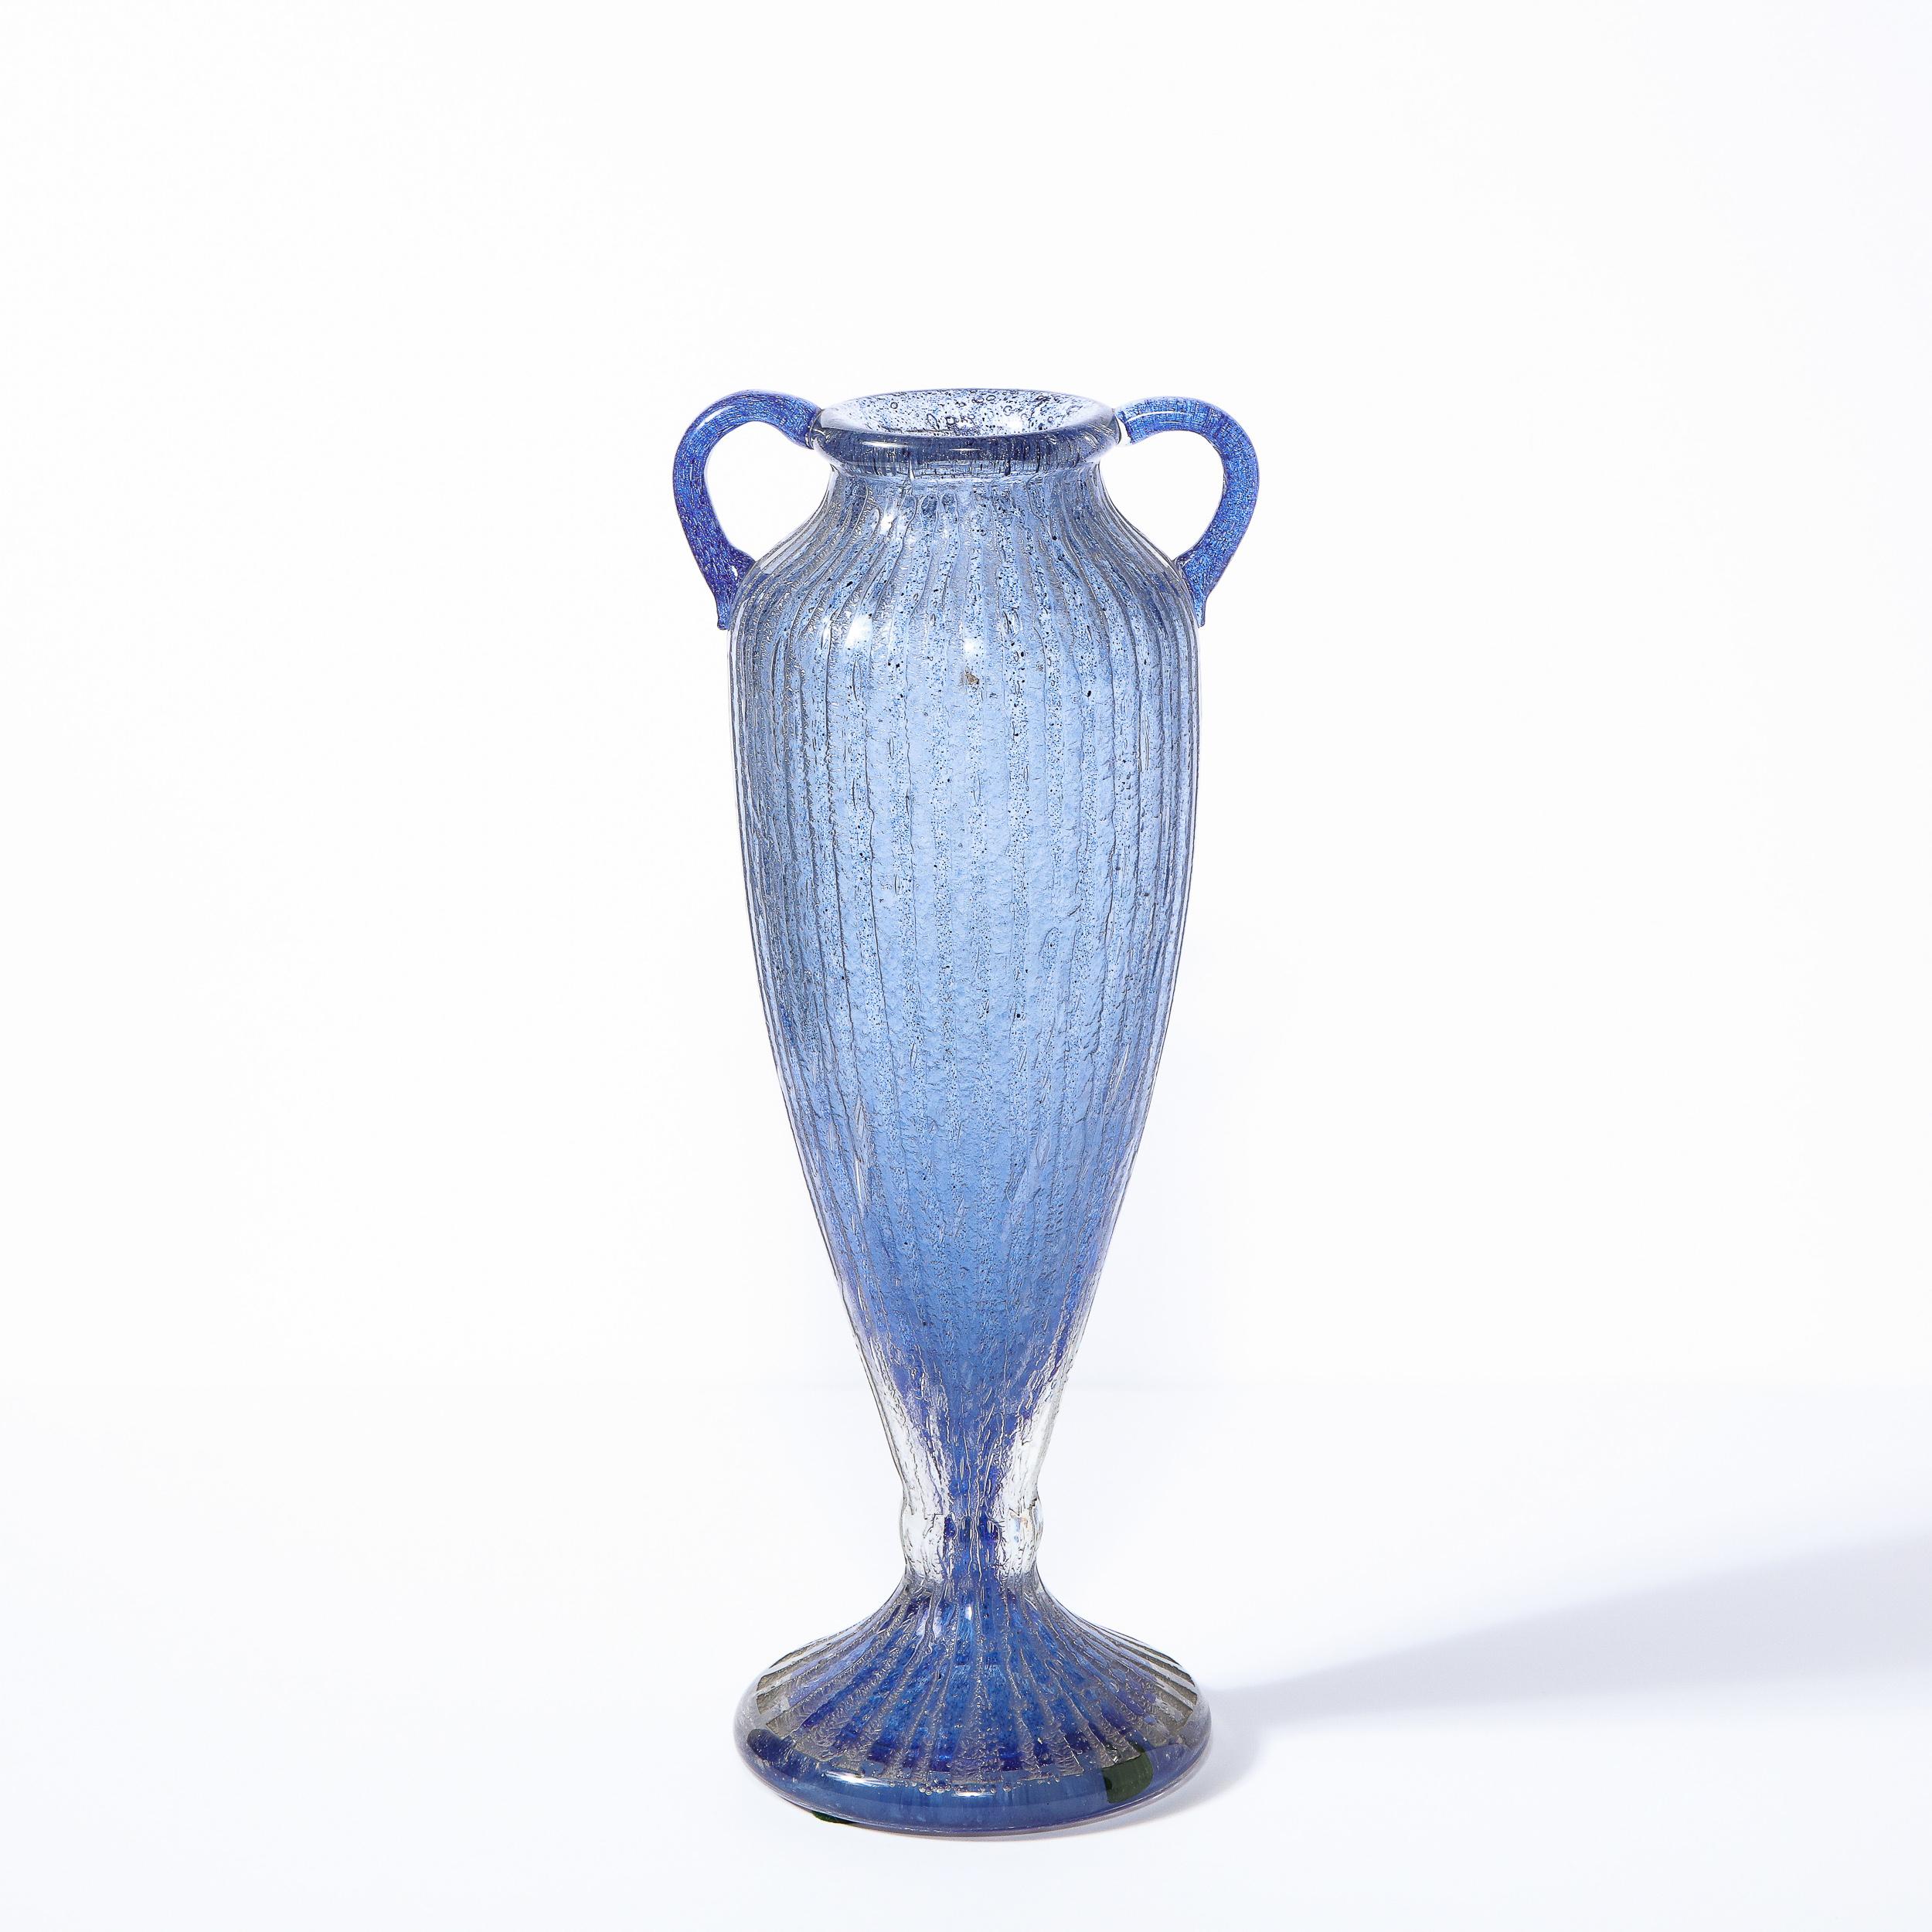 This refined Art Deco amphora vase was realized and signed Nancy Daum in France circa 1925. It features an undulating body flanked on its neck by two rounded handles- all in mottled lilac glass wrapped by a channeled translucent glass exterior. With